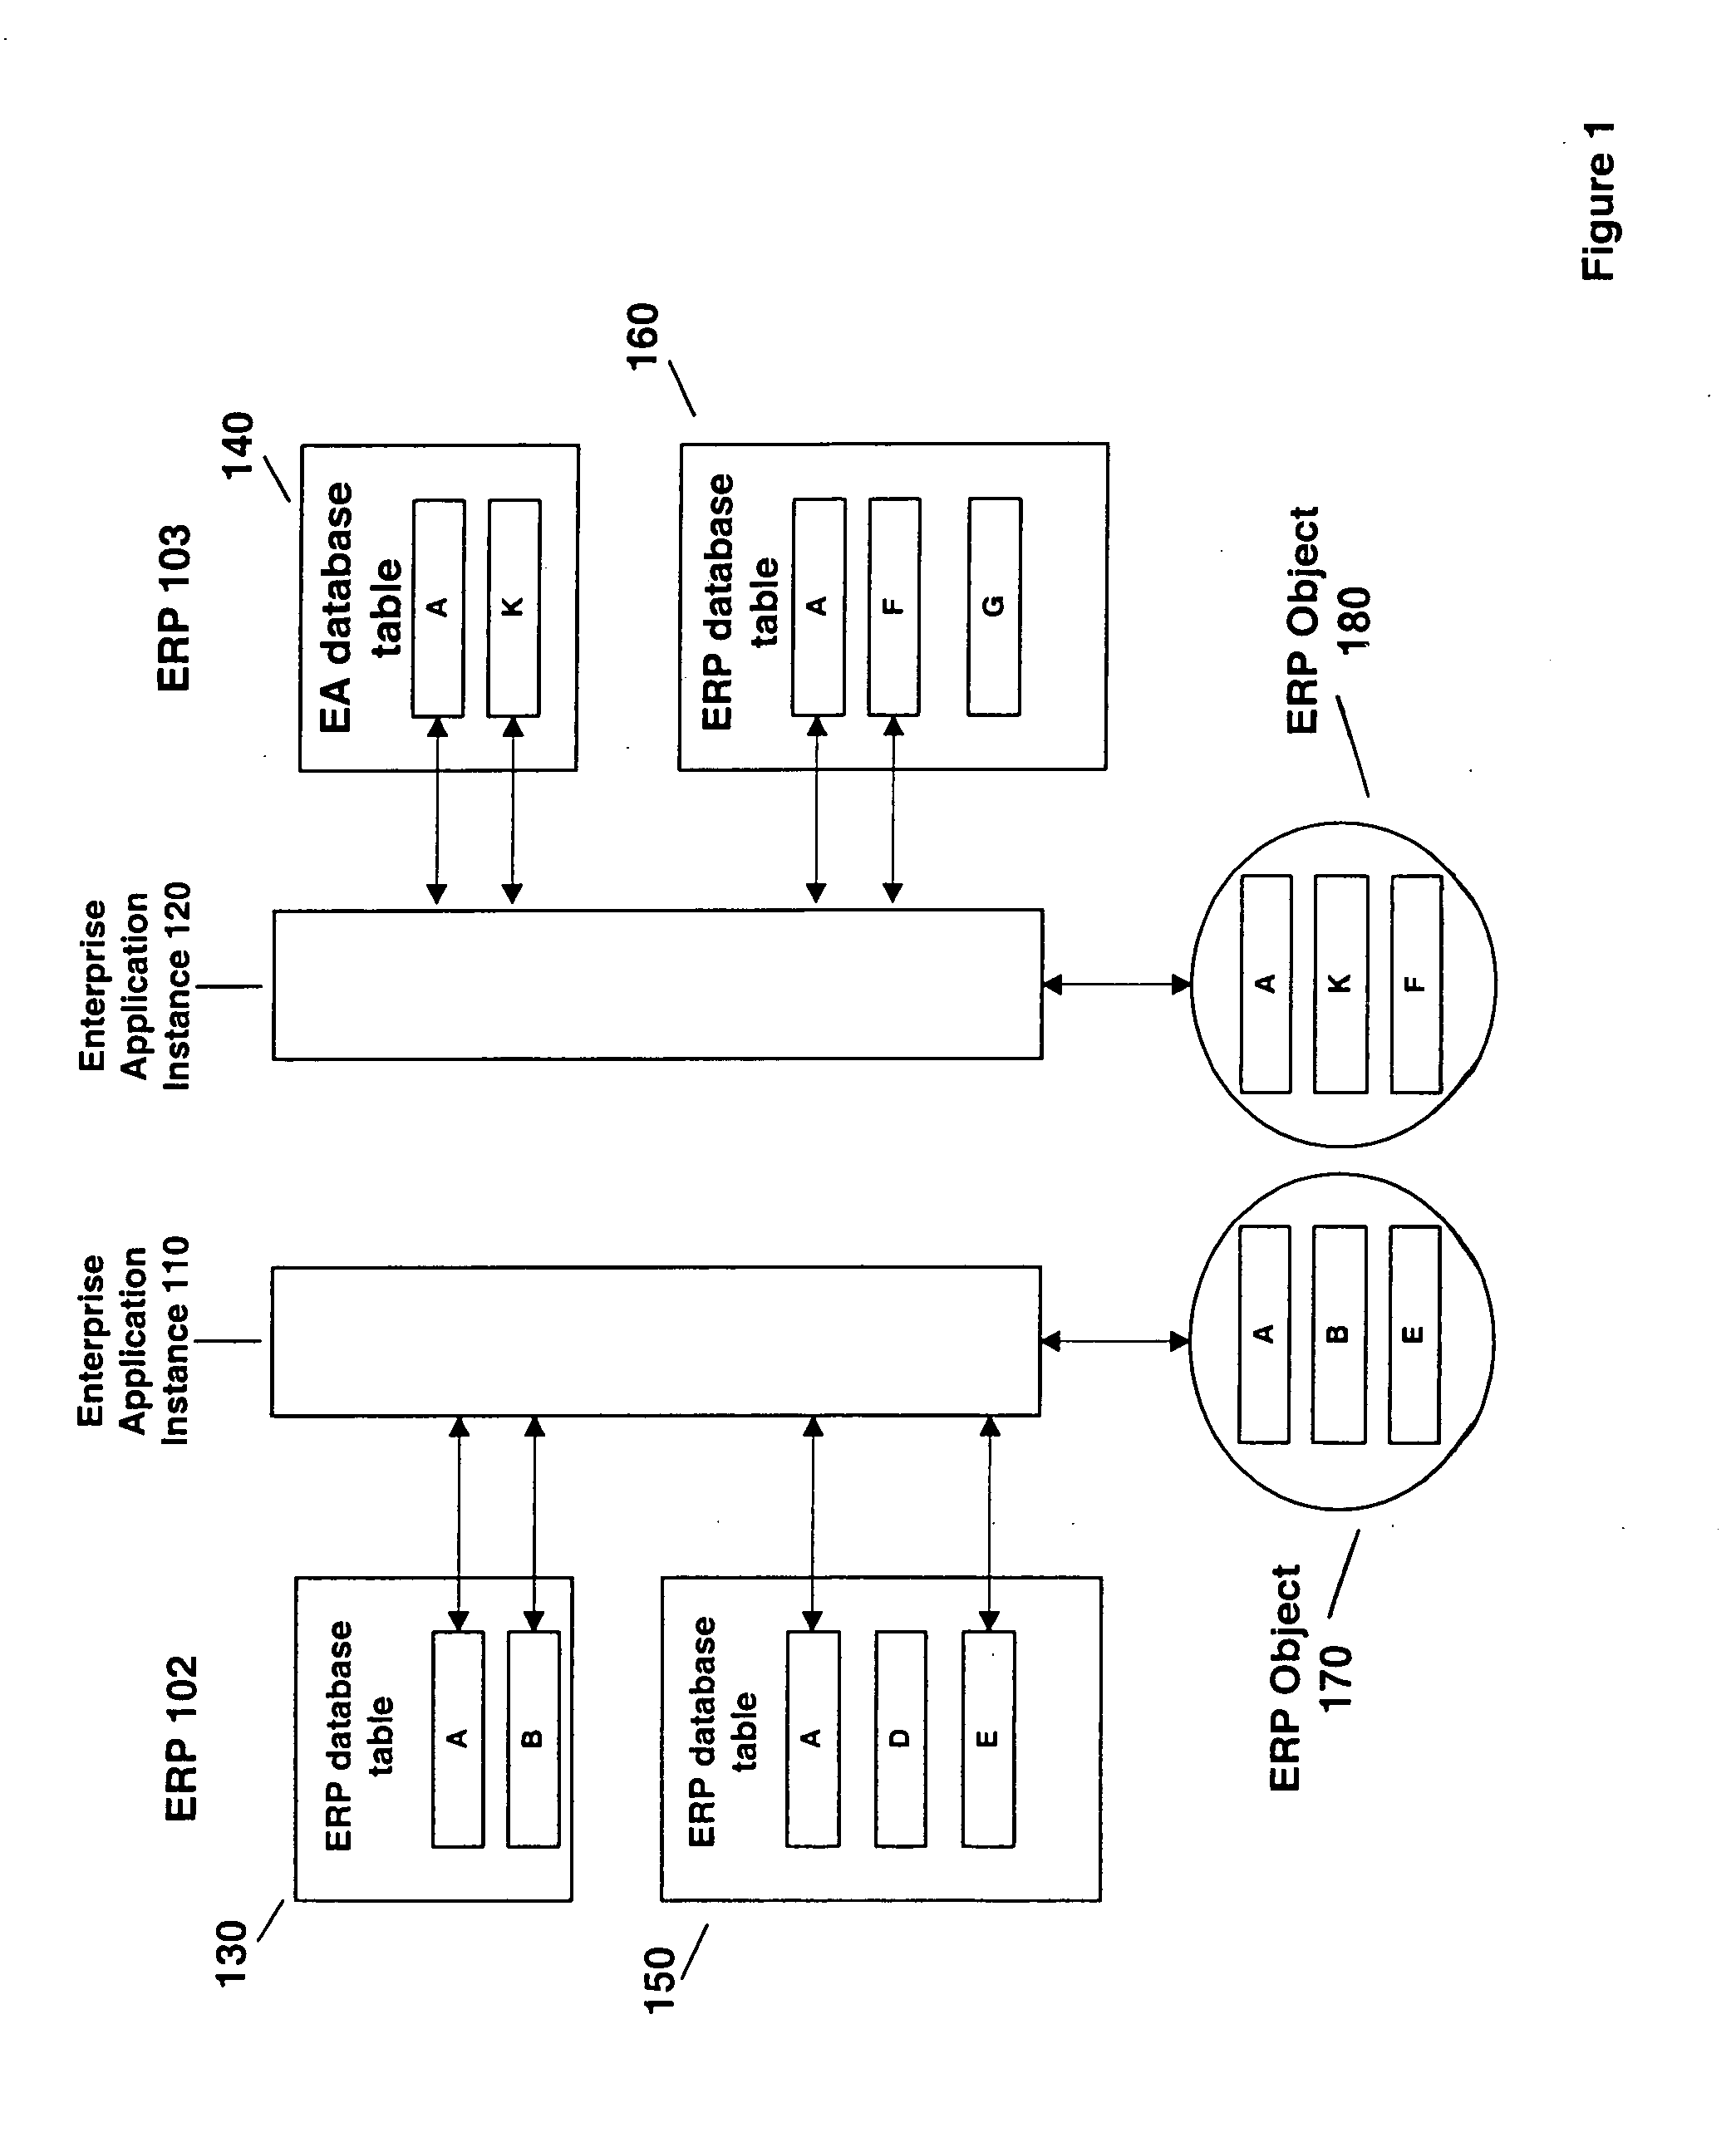 Method and system for providing multi-organization resource management